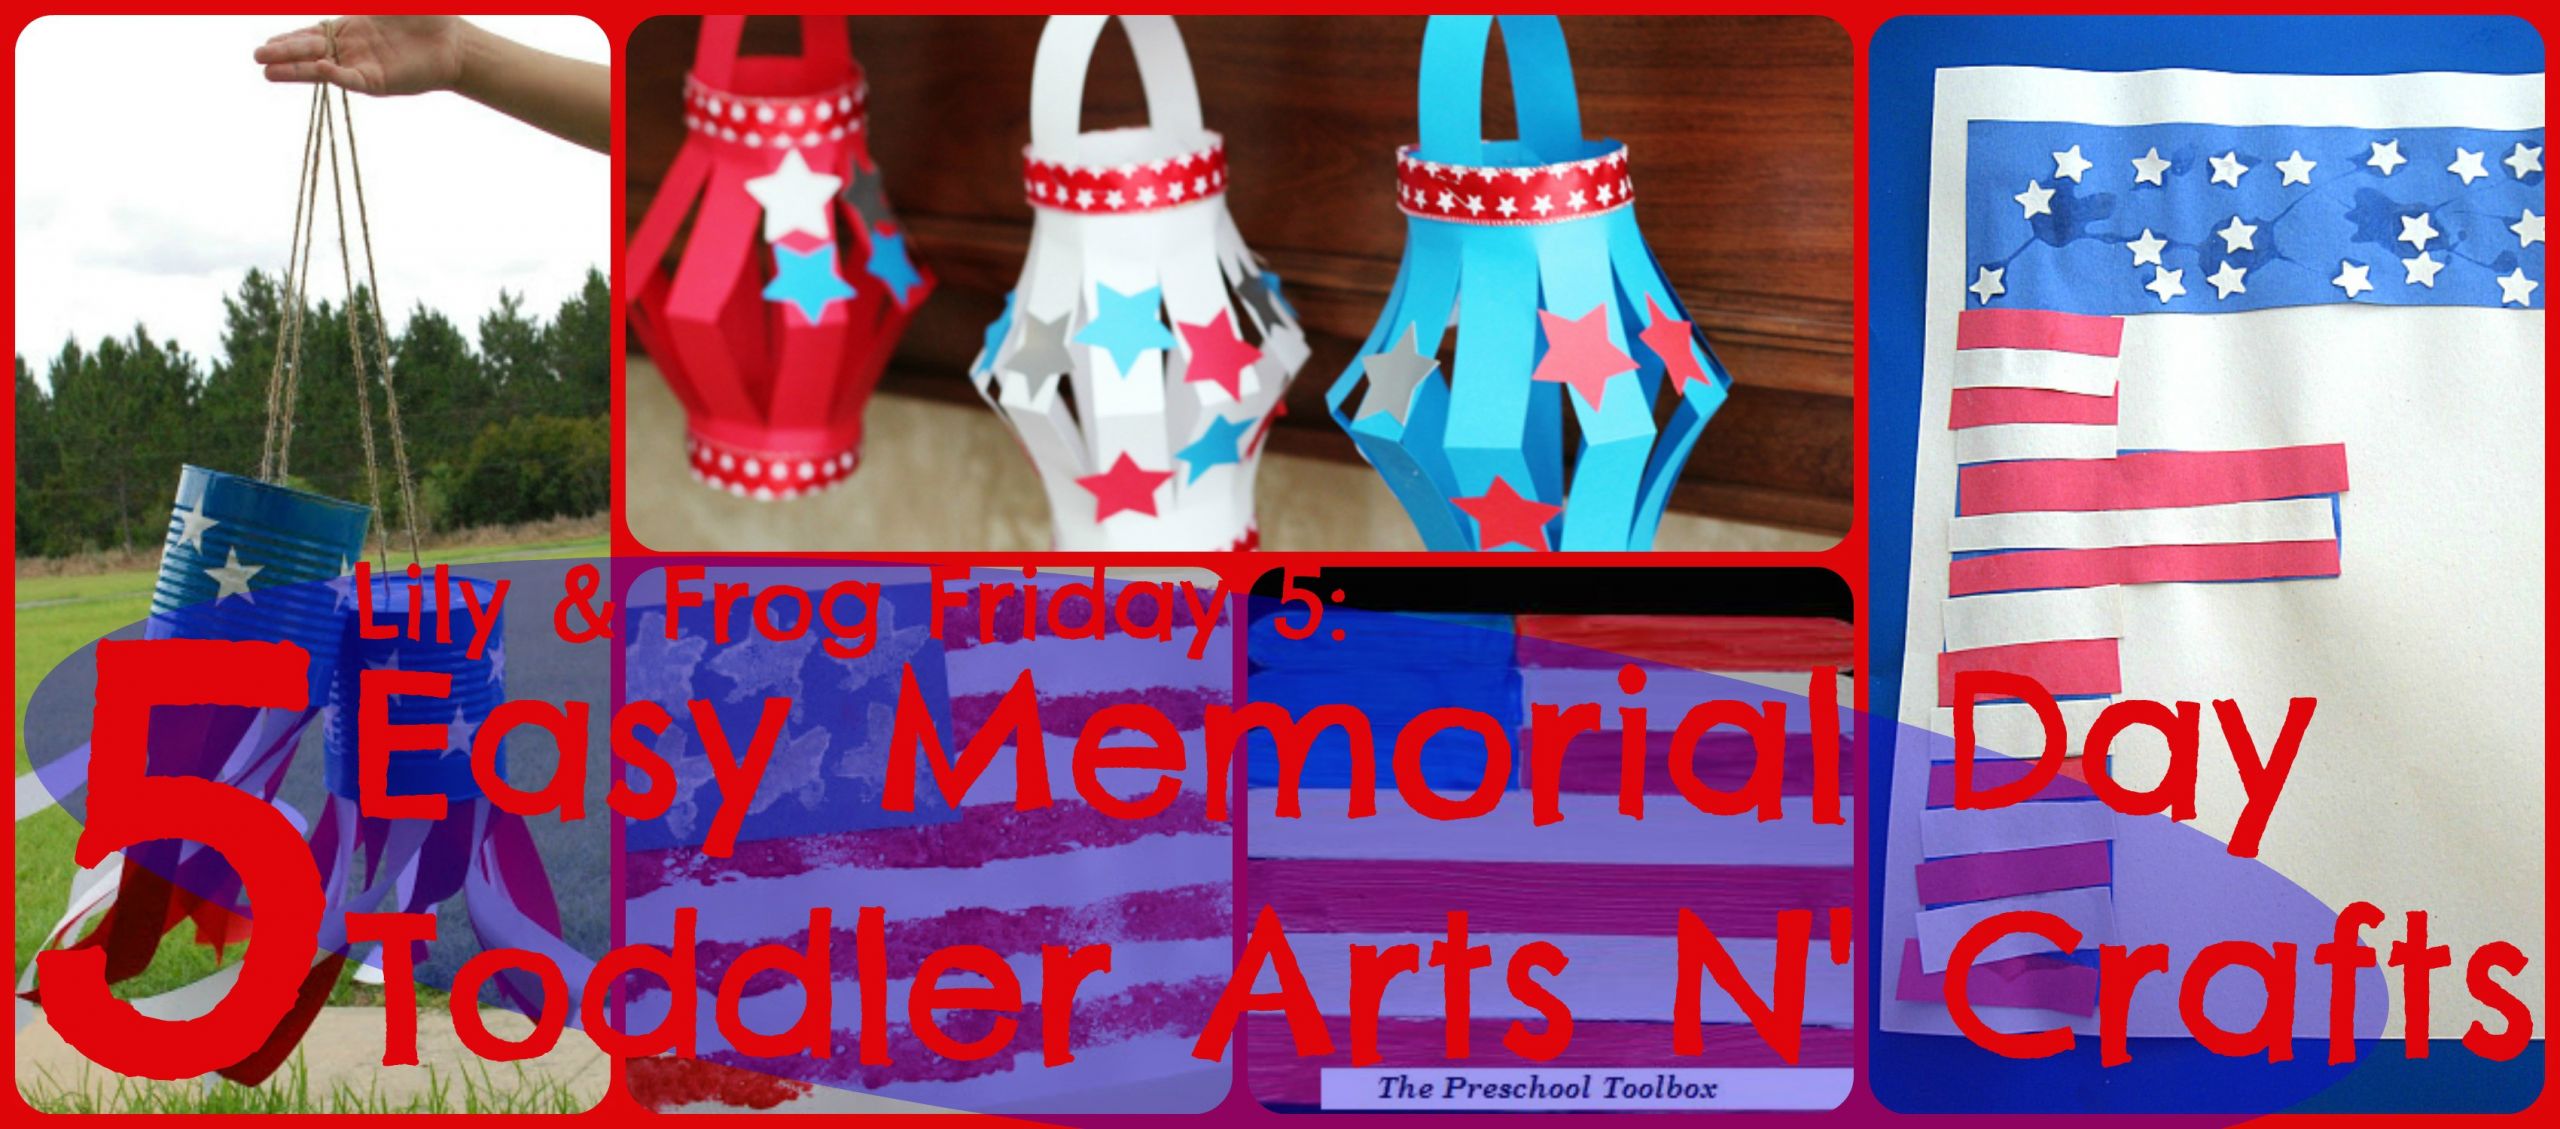 Memorial Day Art And Craft
 Lily & Frog Friday 5 5 Easy Memorial Day Toddler Arts N